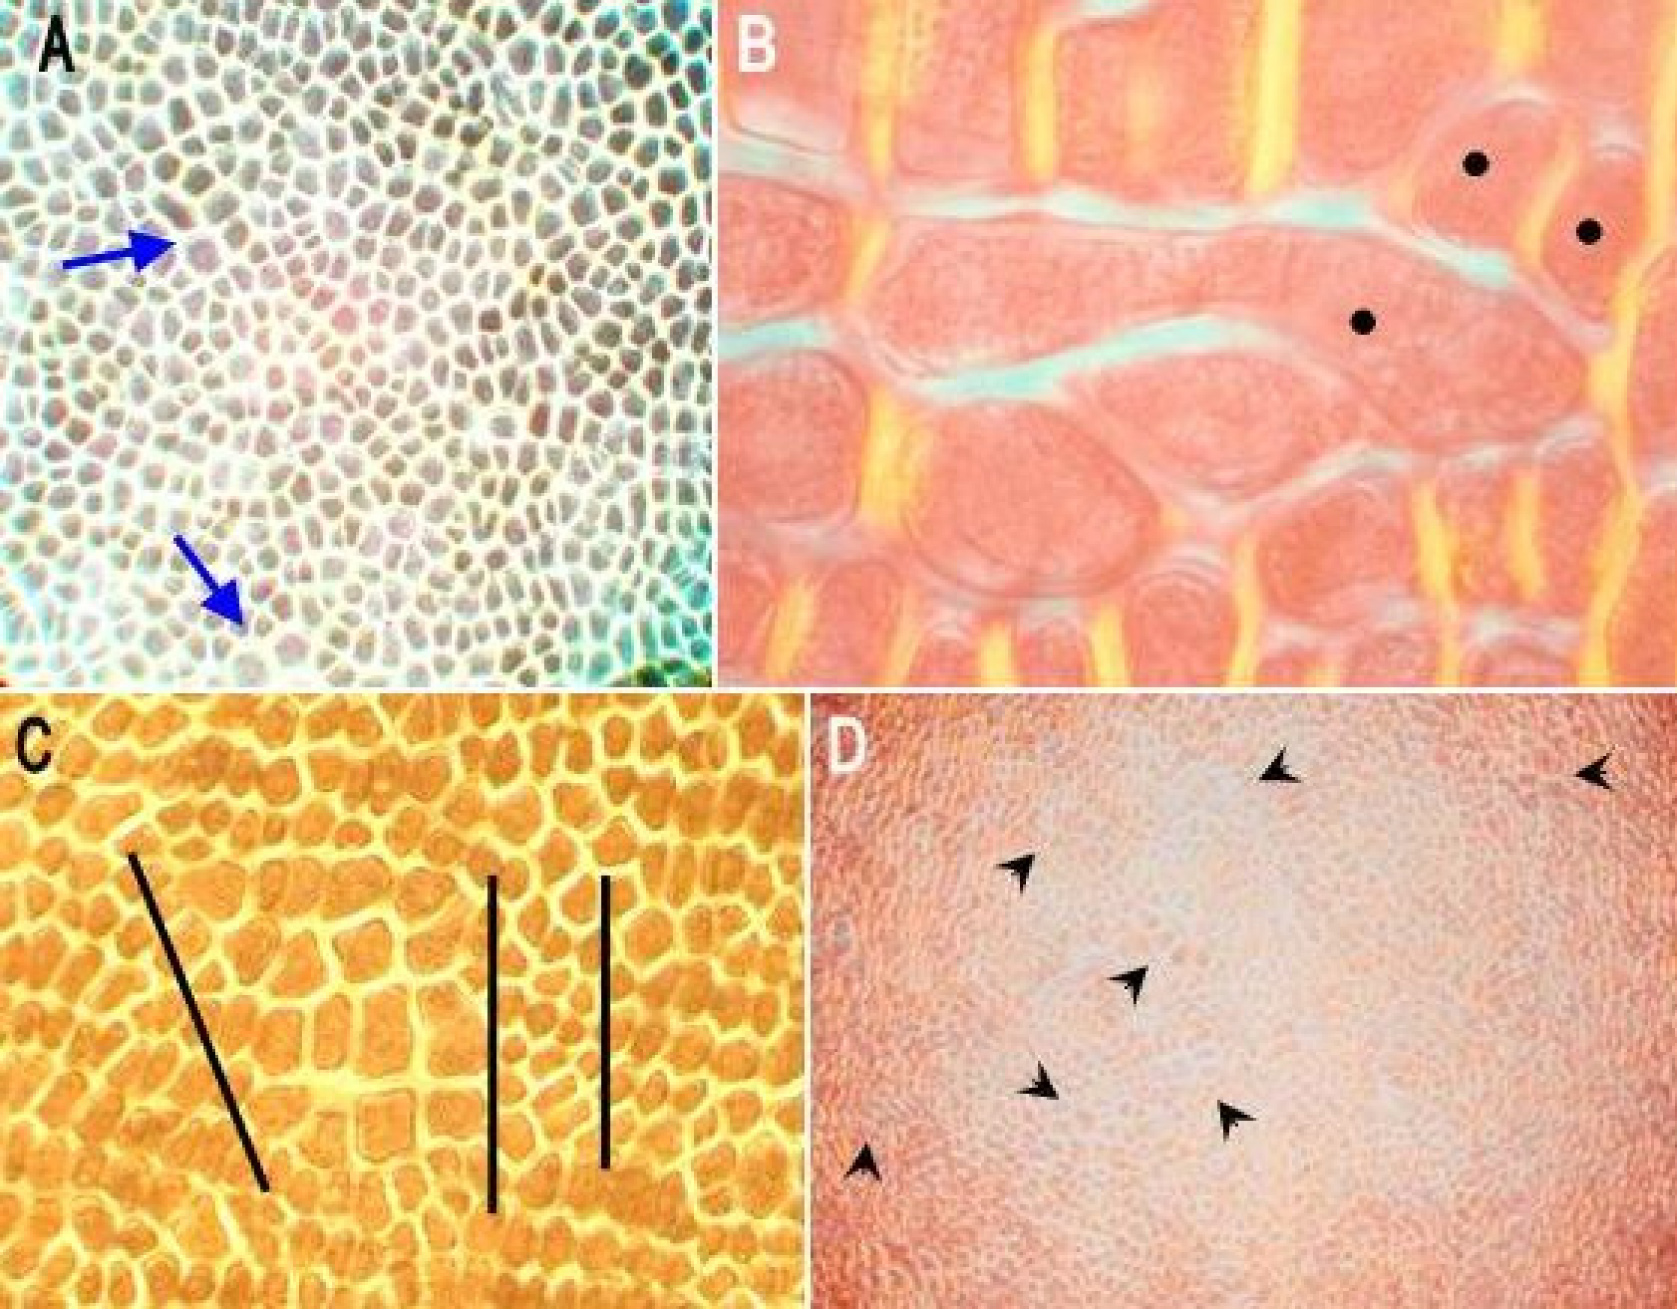 Fig. 1. Developmental mosaics of aleurone layer (surface views) in irradiated caryopses of barley: A – an aleurone layer expressing lighter and darker patches of cells with less or more protein, respectively (stained by bromophenol blue). Two clones of larger cells are marked by arrows; B – three cells (black dots) expressing changed cell cycles – a large cell is developed as omitting at least two cytokineses; two small cells are created after one additional cytokinesis, in excess when compared to normal aleurone cells; C – a mosaic of aleurone layer with two adjacent clones of large and small cells, marked by black lines; D – a large fragment of aleurone layer with increased frequency of mutated cell clones, some are marked by arrows. Pictures B, C and D are taken under a polarising microscope.